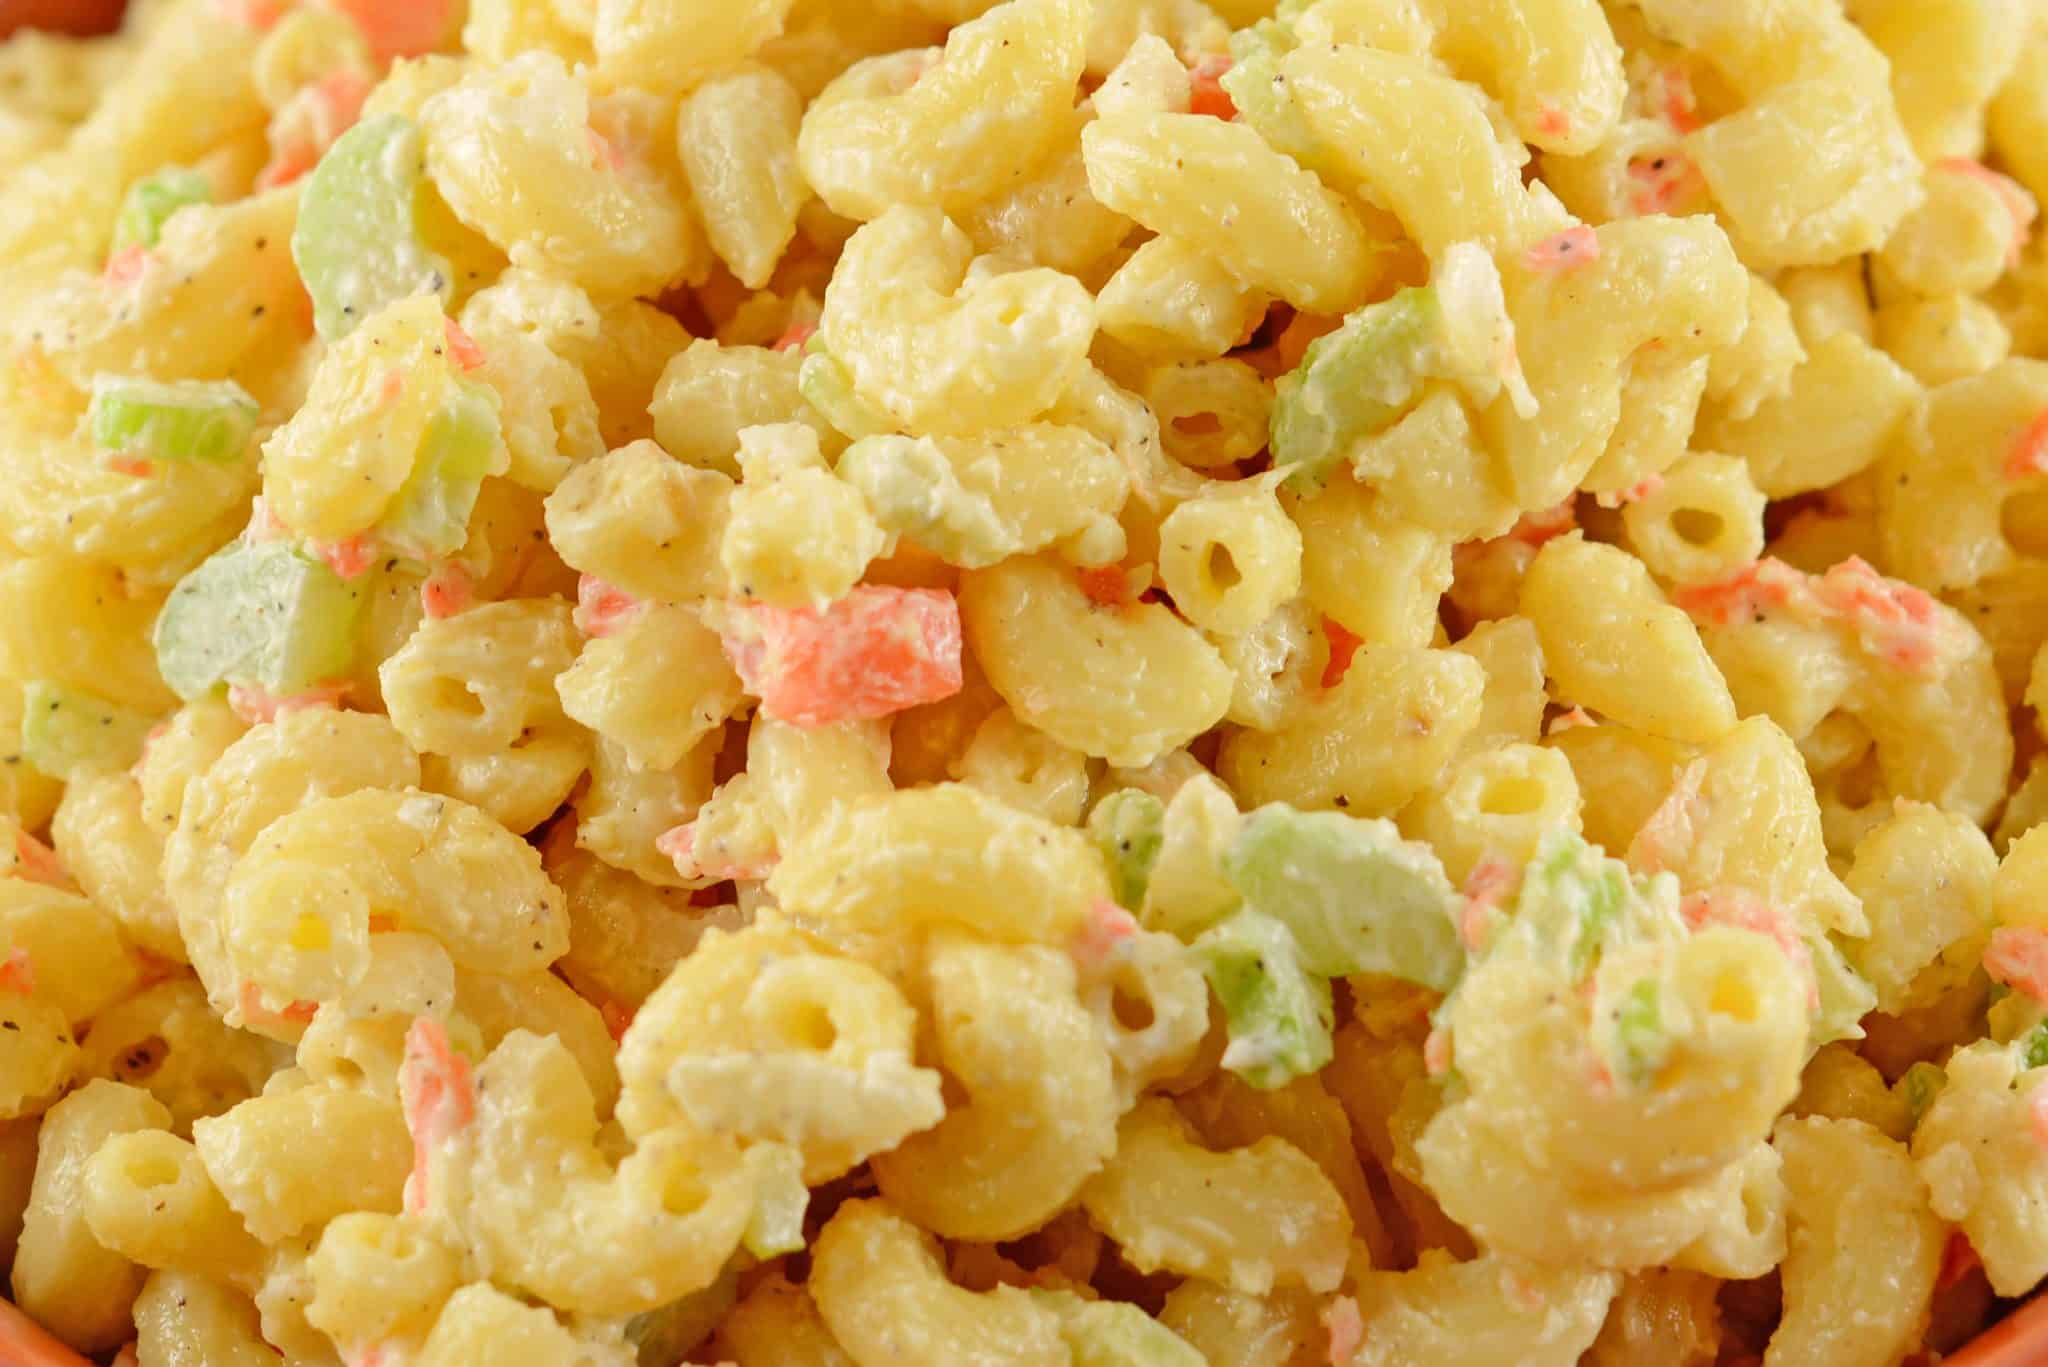 This classic Macaroni salad recipe shows you exactly how to make a pasta salad that will have everyone asking for in seconds. Great for potlucks and cooking! #classicmacaronisalad #howtomakemacaronisalad www.savoryexperiments.com